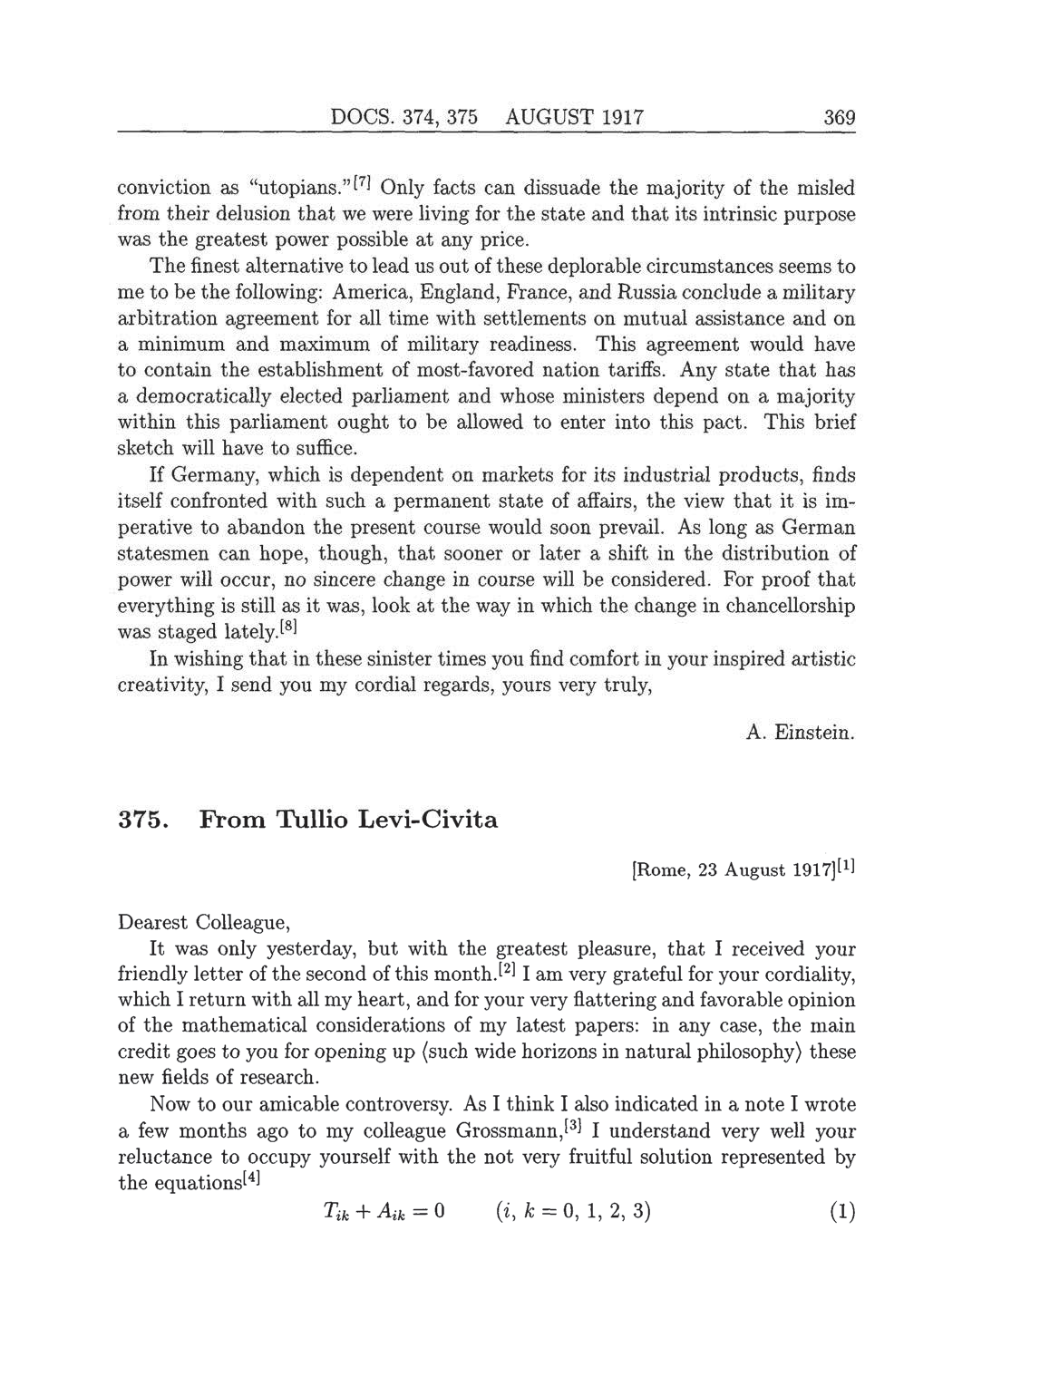 Volume 8: The Berlin Years: Correspondence, 1914-1918 (English translation supplement) page 369